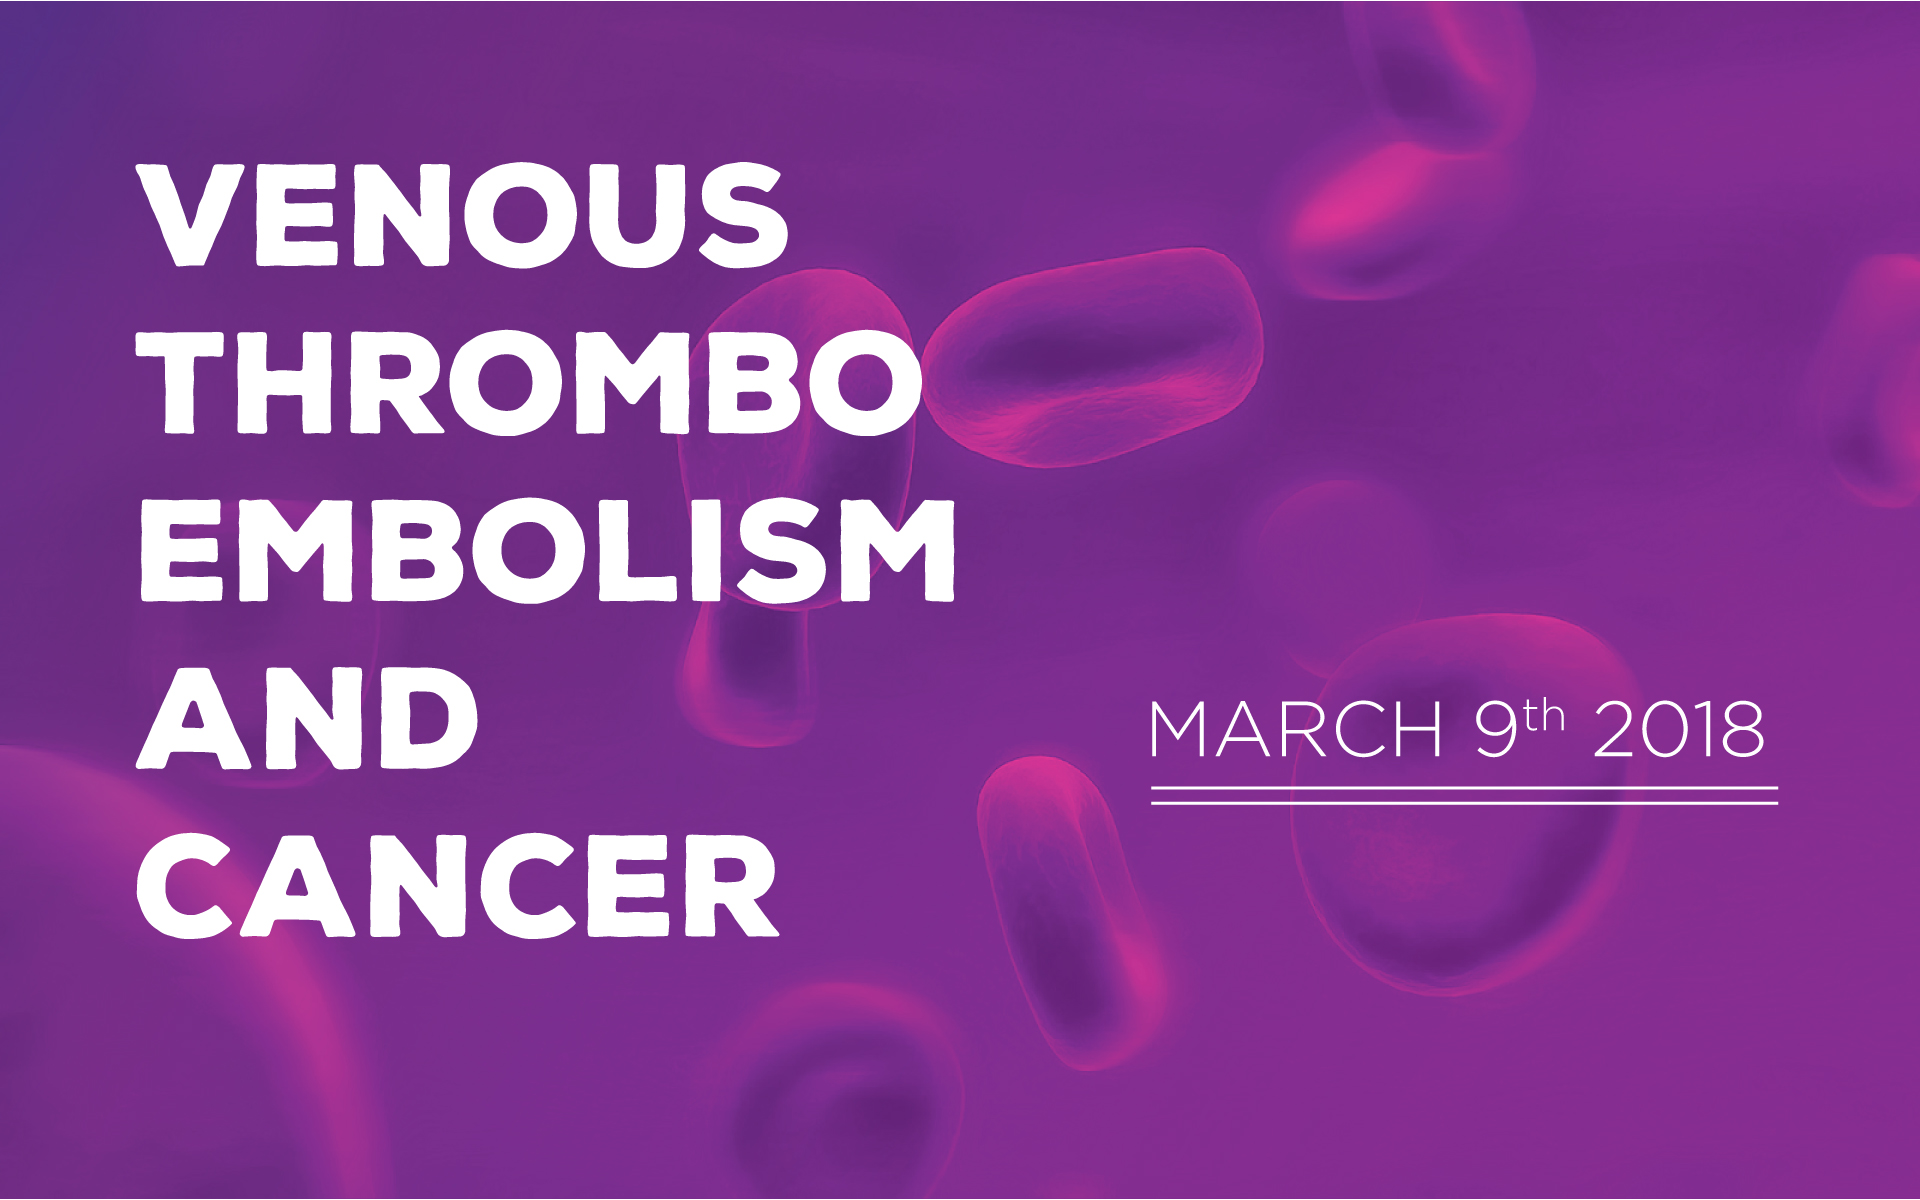 Venous Thromboembolism and Cancer